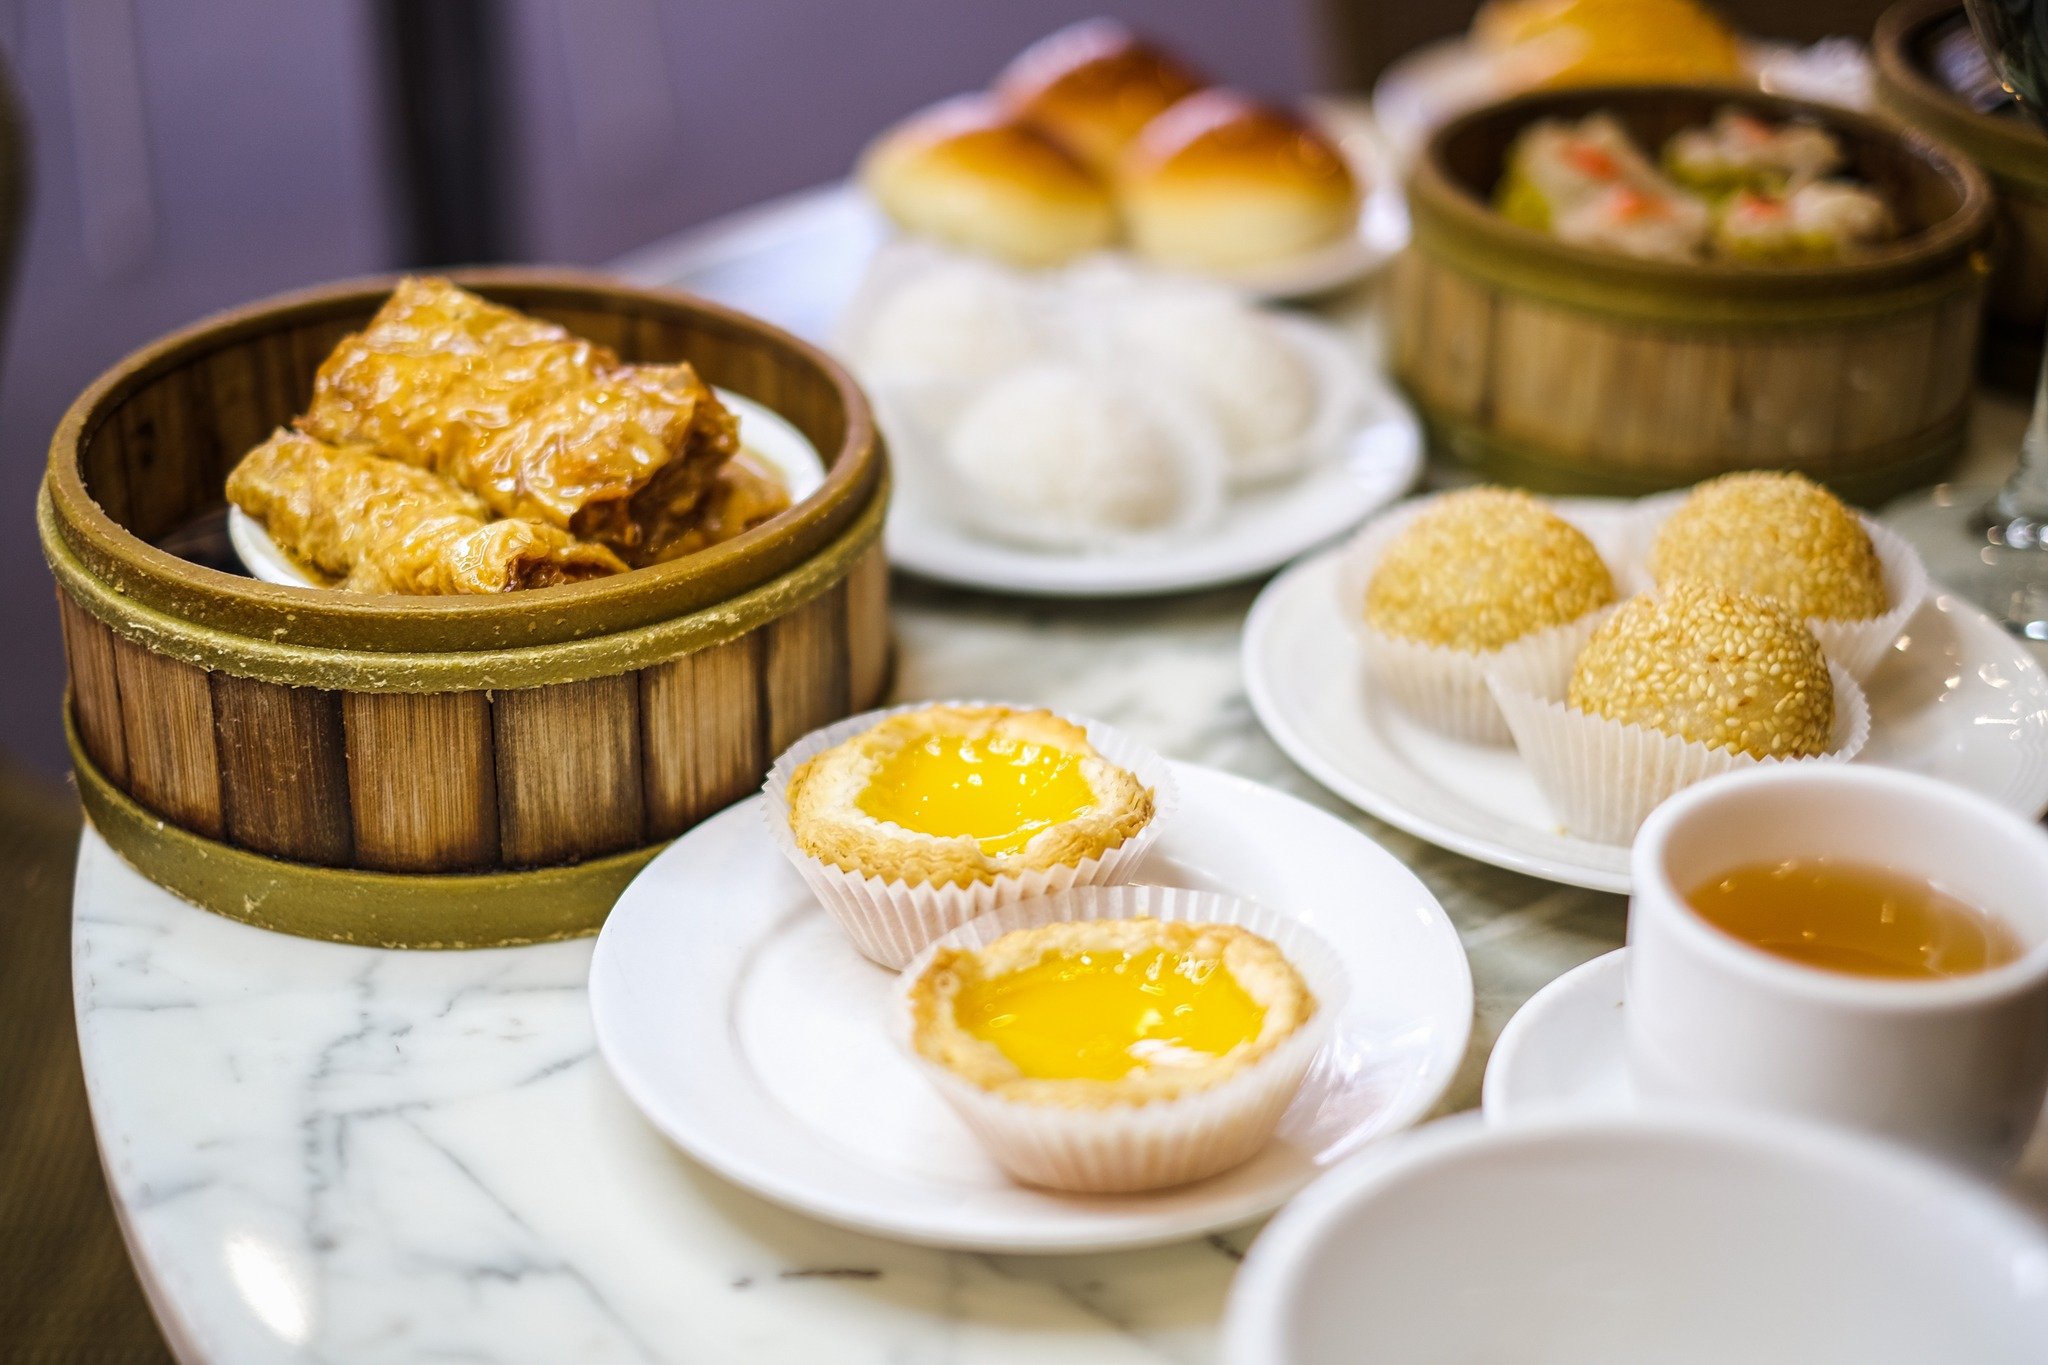 We're open for Anzac Day! 🥳

Ginseng will be hosting a special Anzac Day Yum Cha on the day!
Book now before seats sell out! 🎟️

🥟 Session 1: 11am - 12:30pm
🥟 Session 2: 12:45pm - 2:30pm

📞 Book now on 6282 9866 or ginseng@hellenicclub.com.au

 